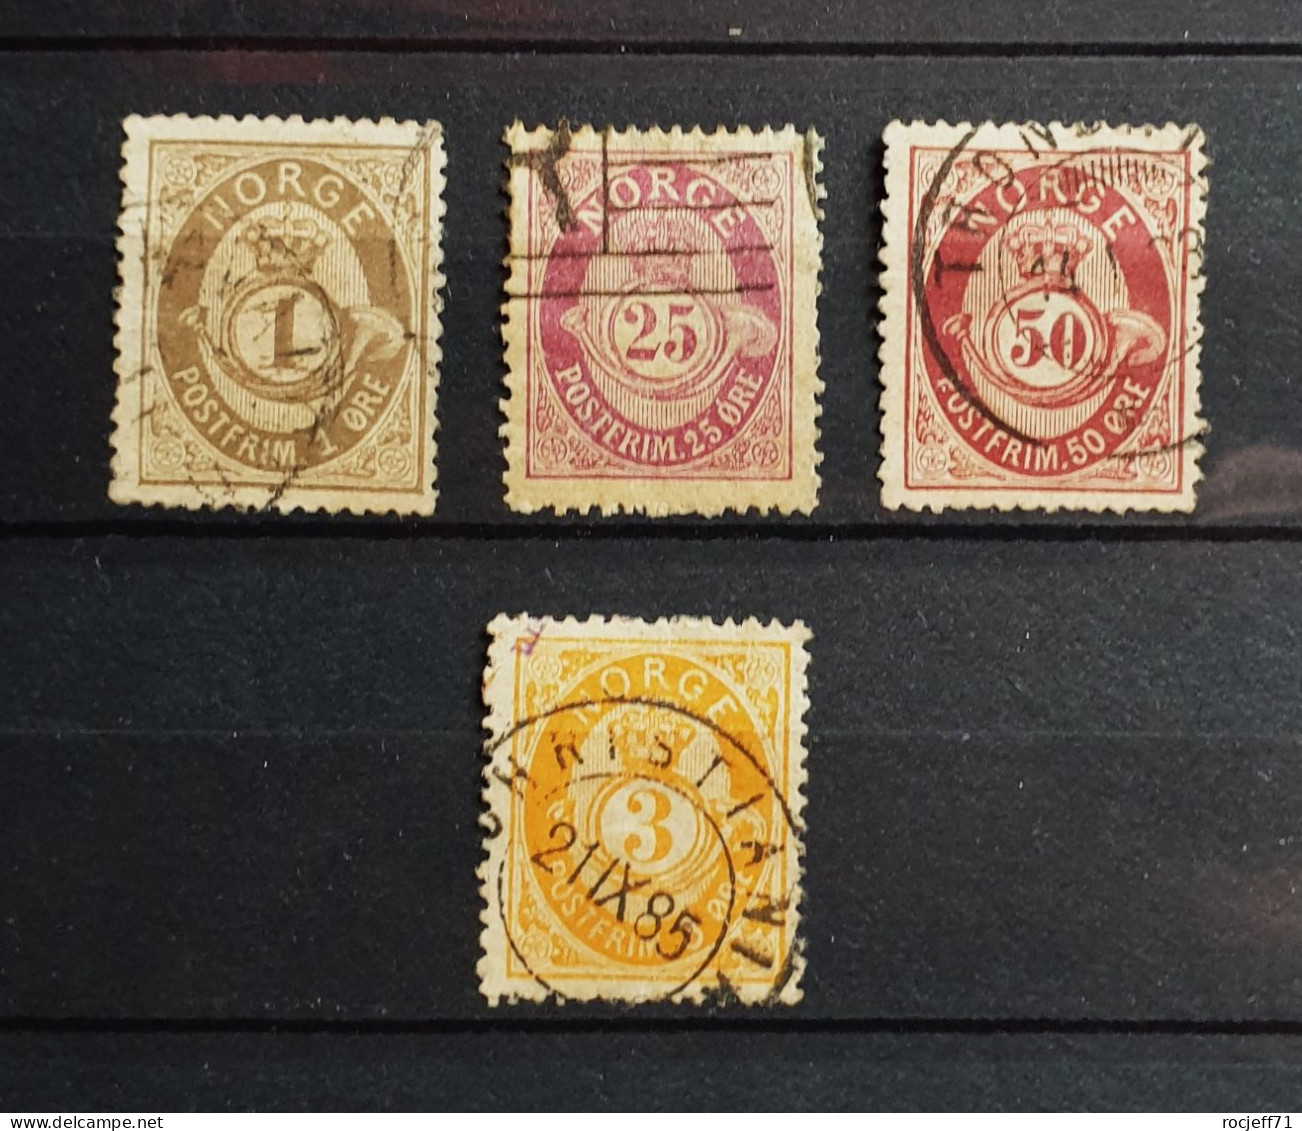 05 - 24 - Gino - Norvège Lot De Vieux Timbres - Norge Old Stamps - Value 100 Euros - Gebraucht